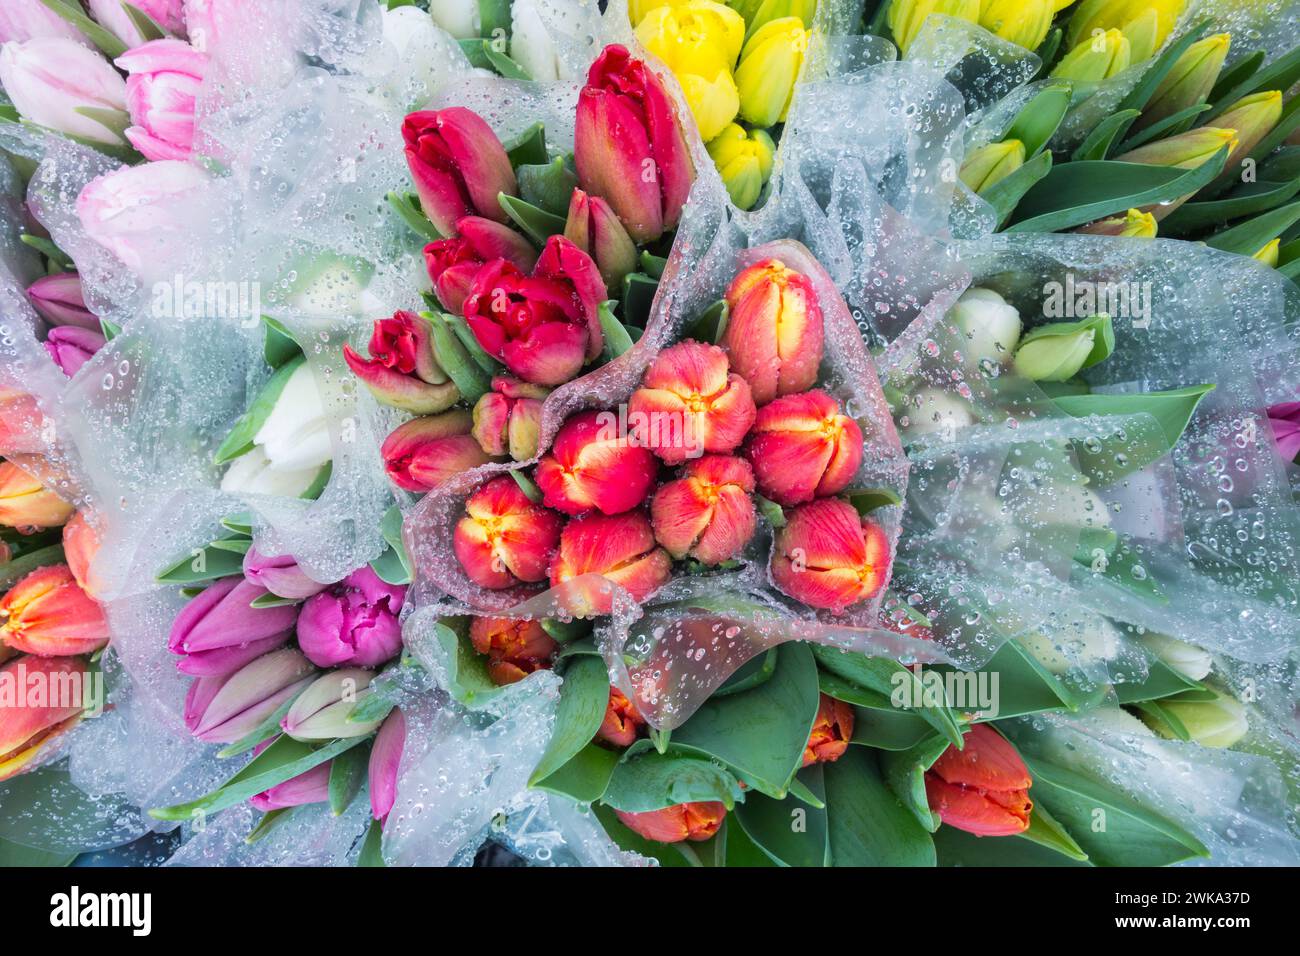 Colourful cellophane wrapped red tulips covered in a mist of fine rain droplets Stock Photo